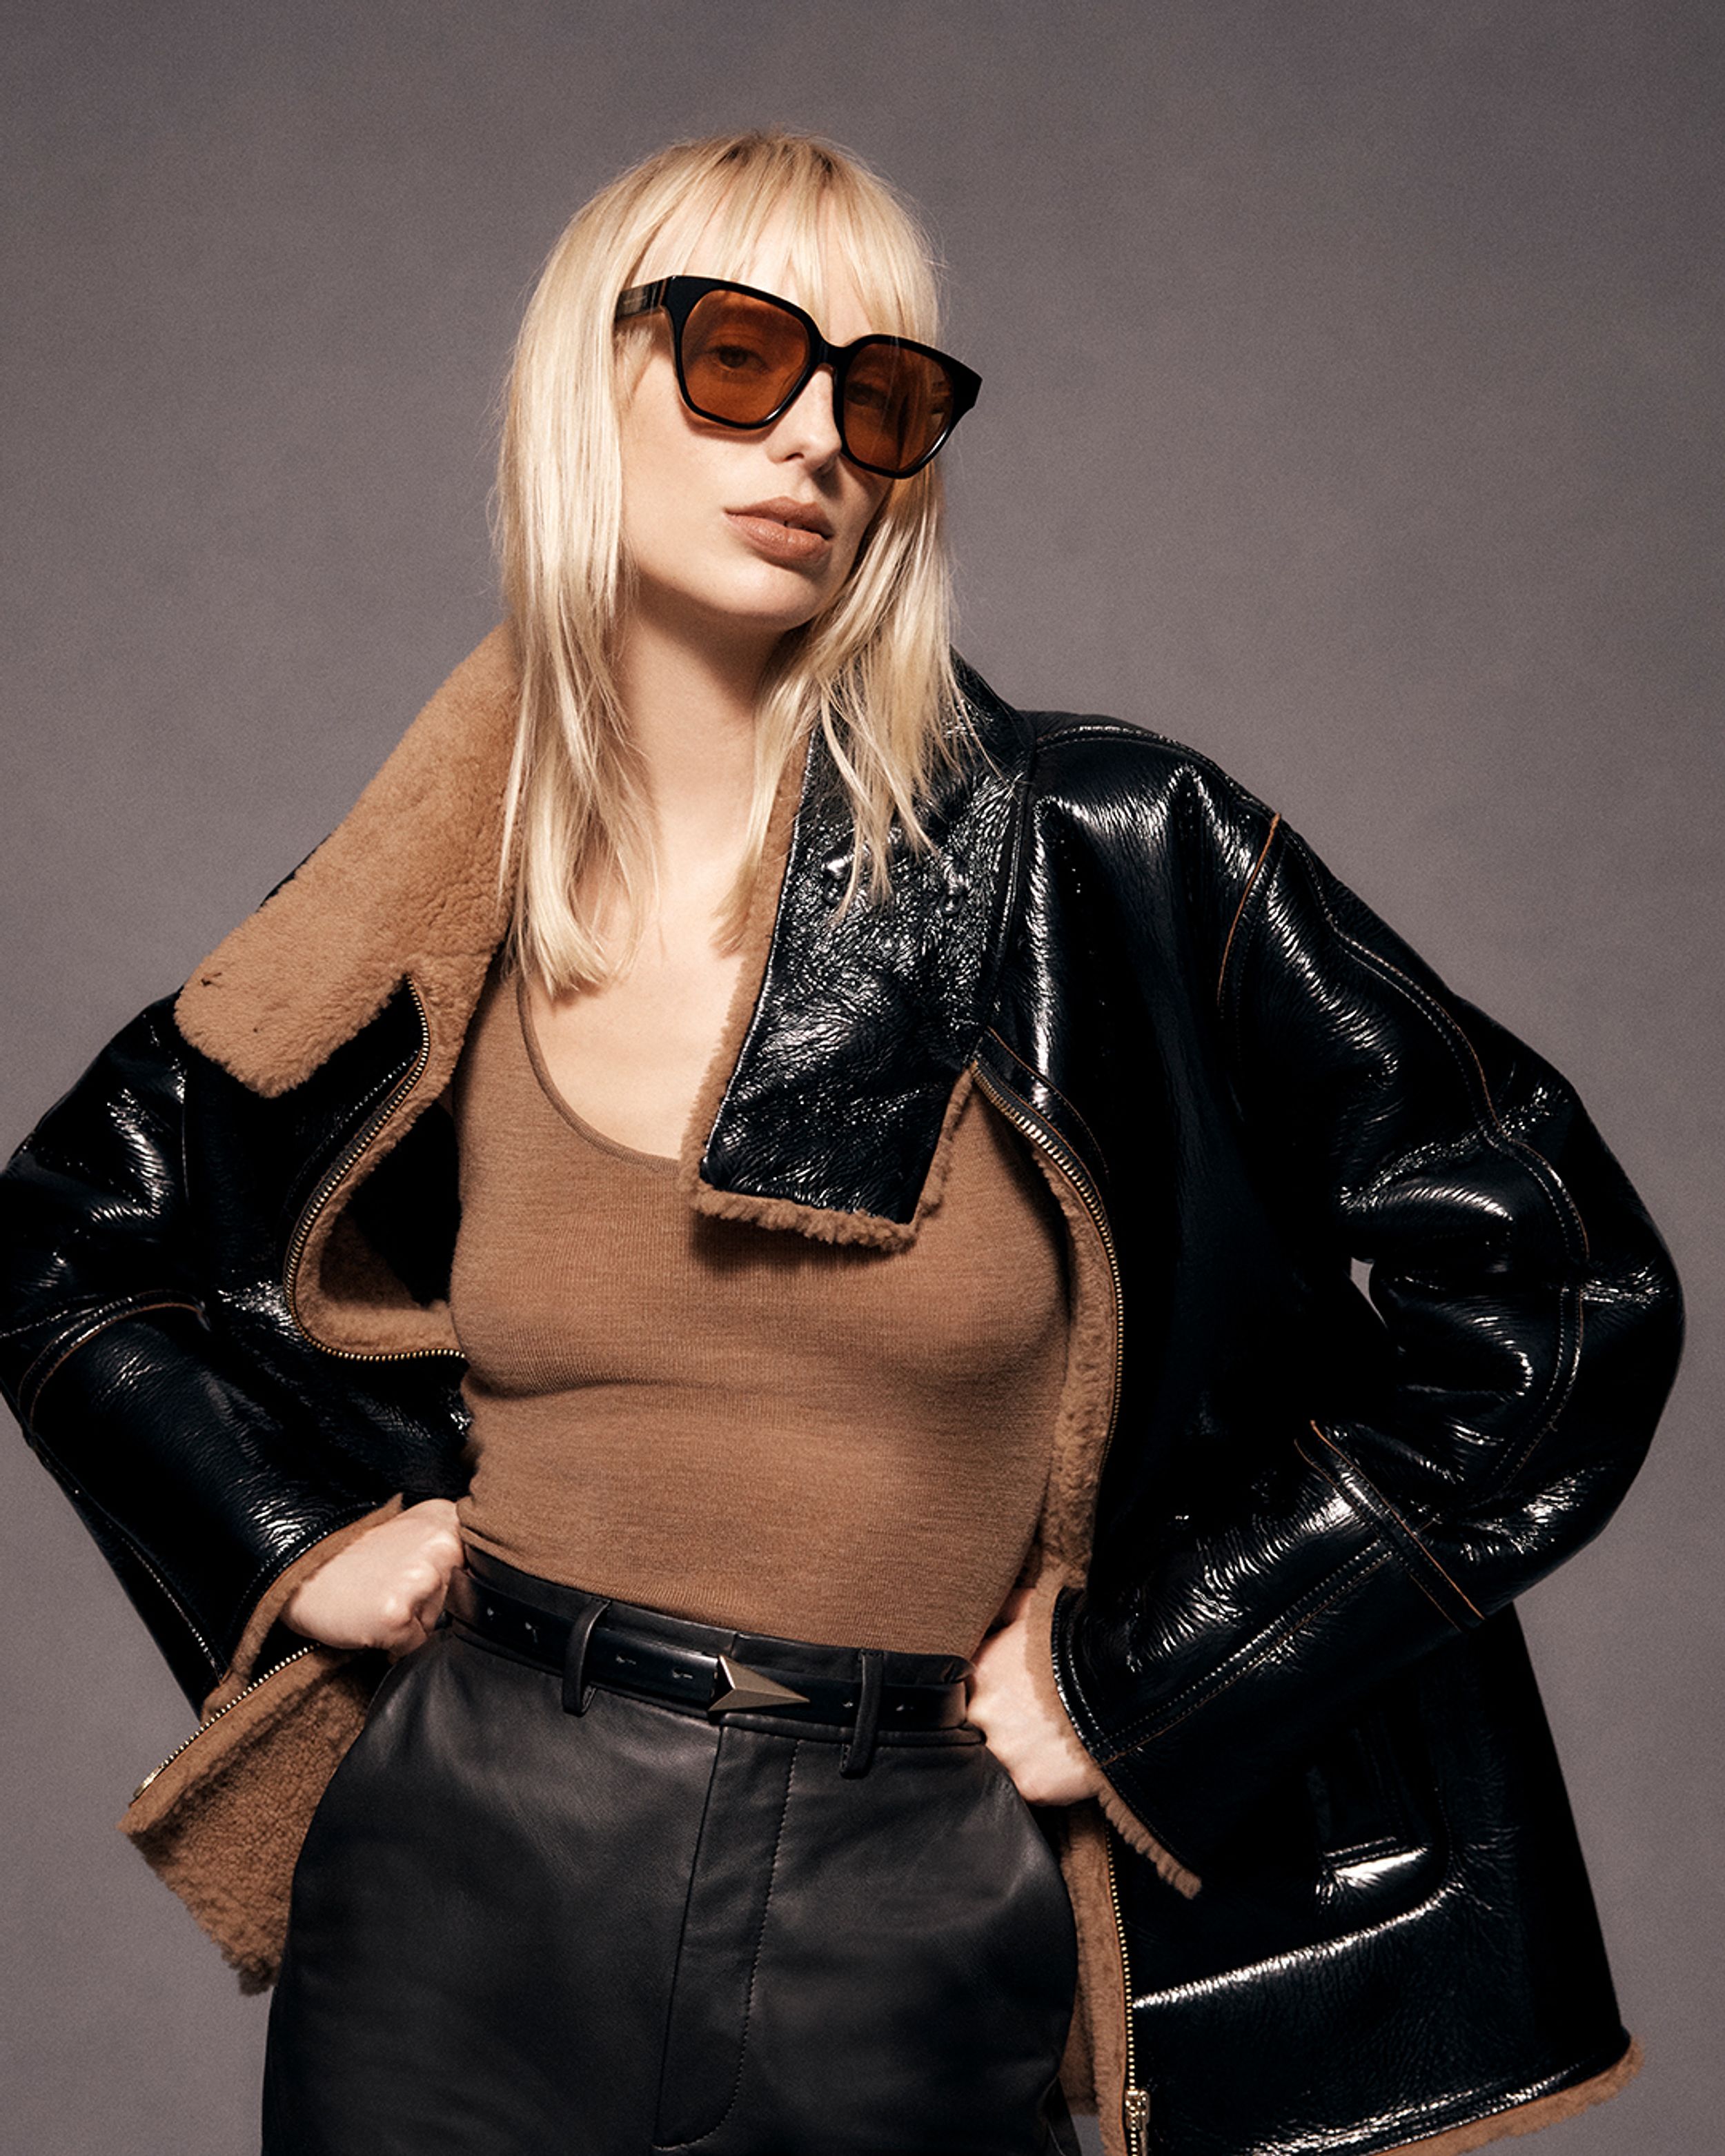 Blonde model posing with hands on hips wearing a black shearling jacket and brown tank top